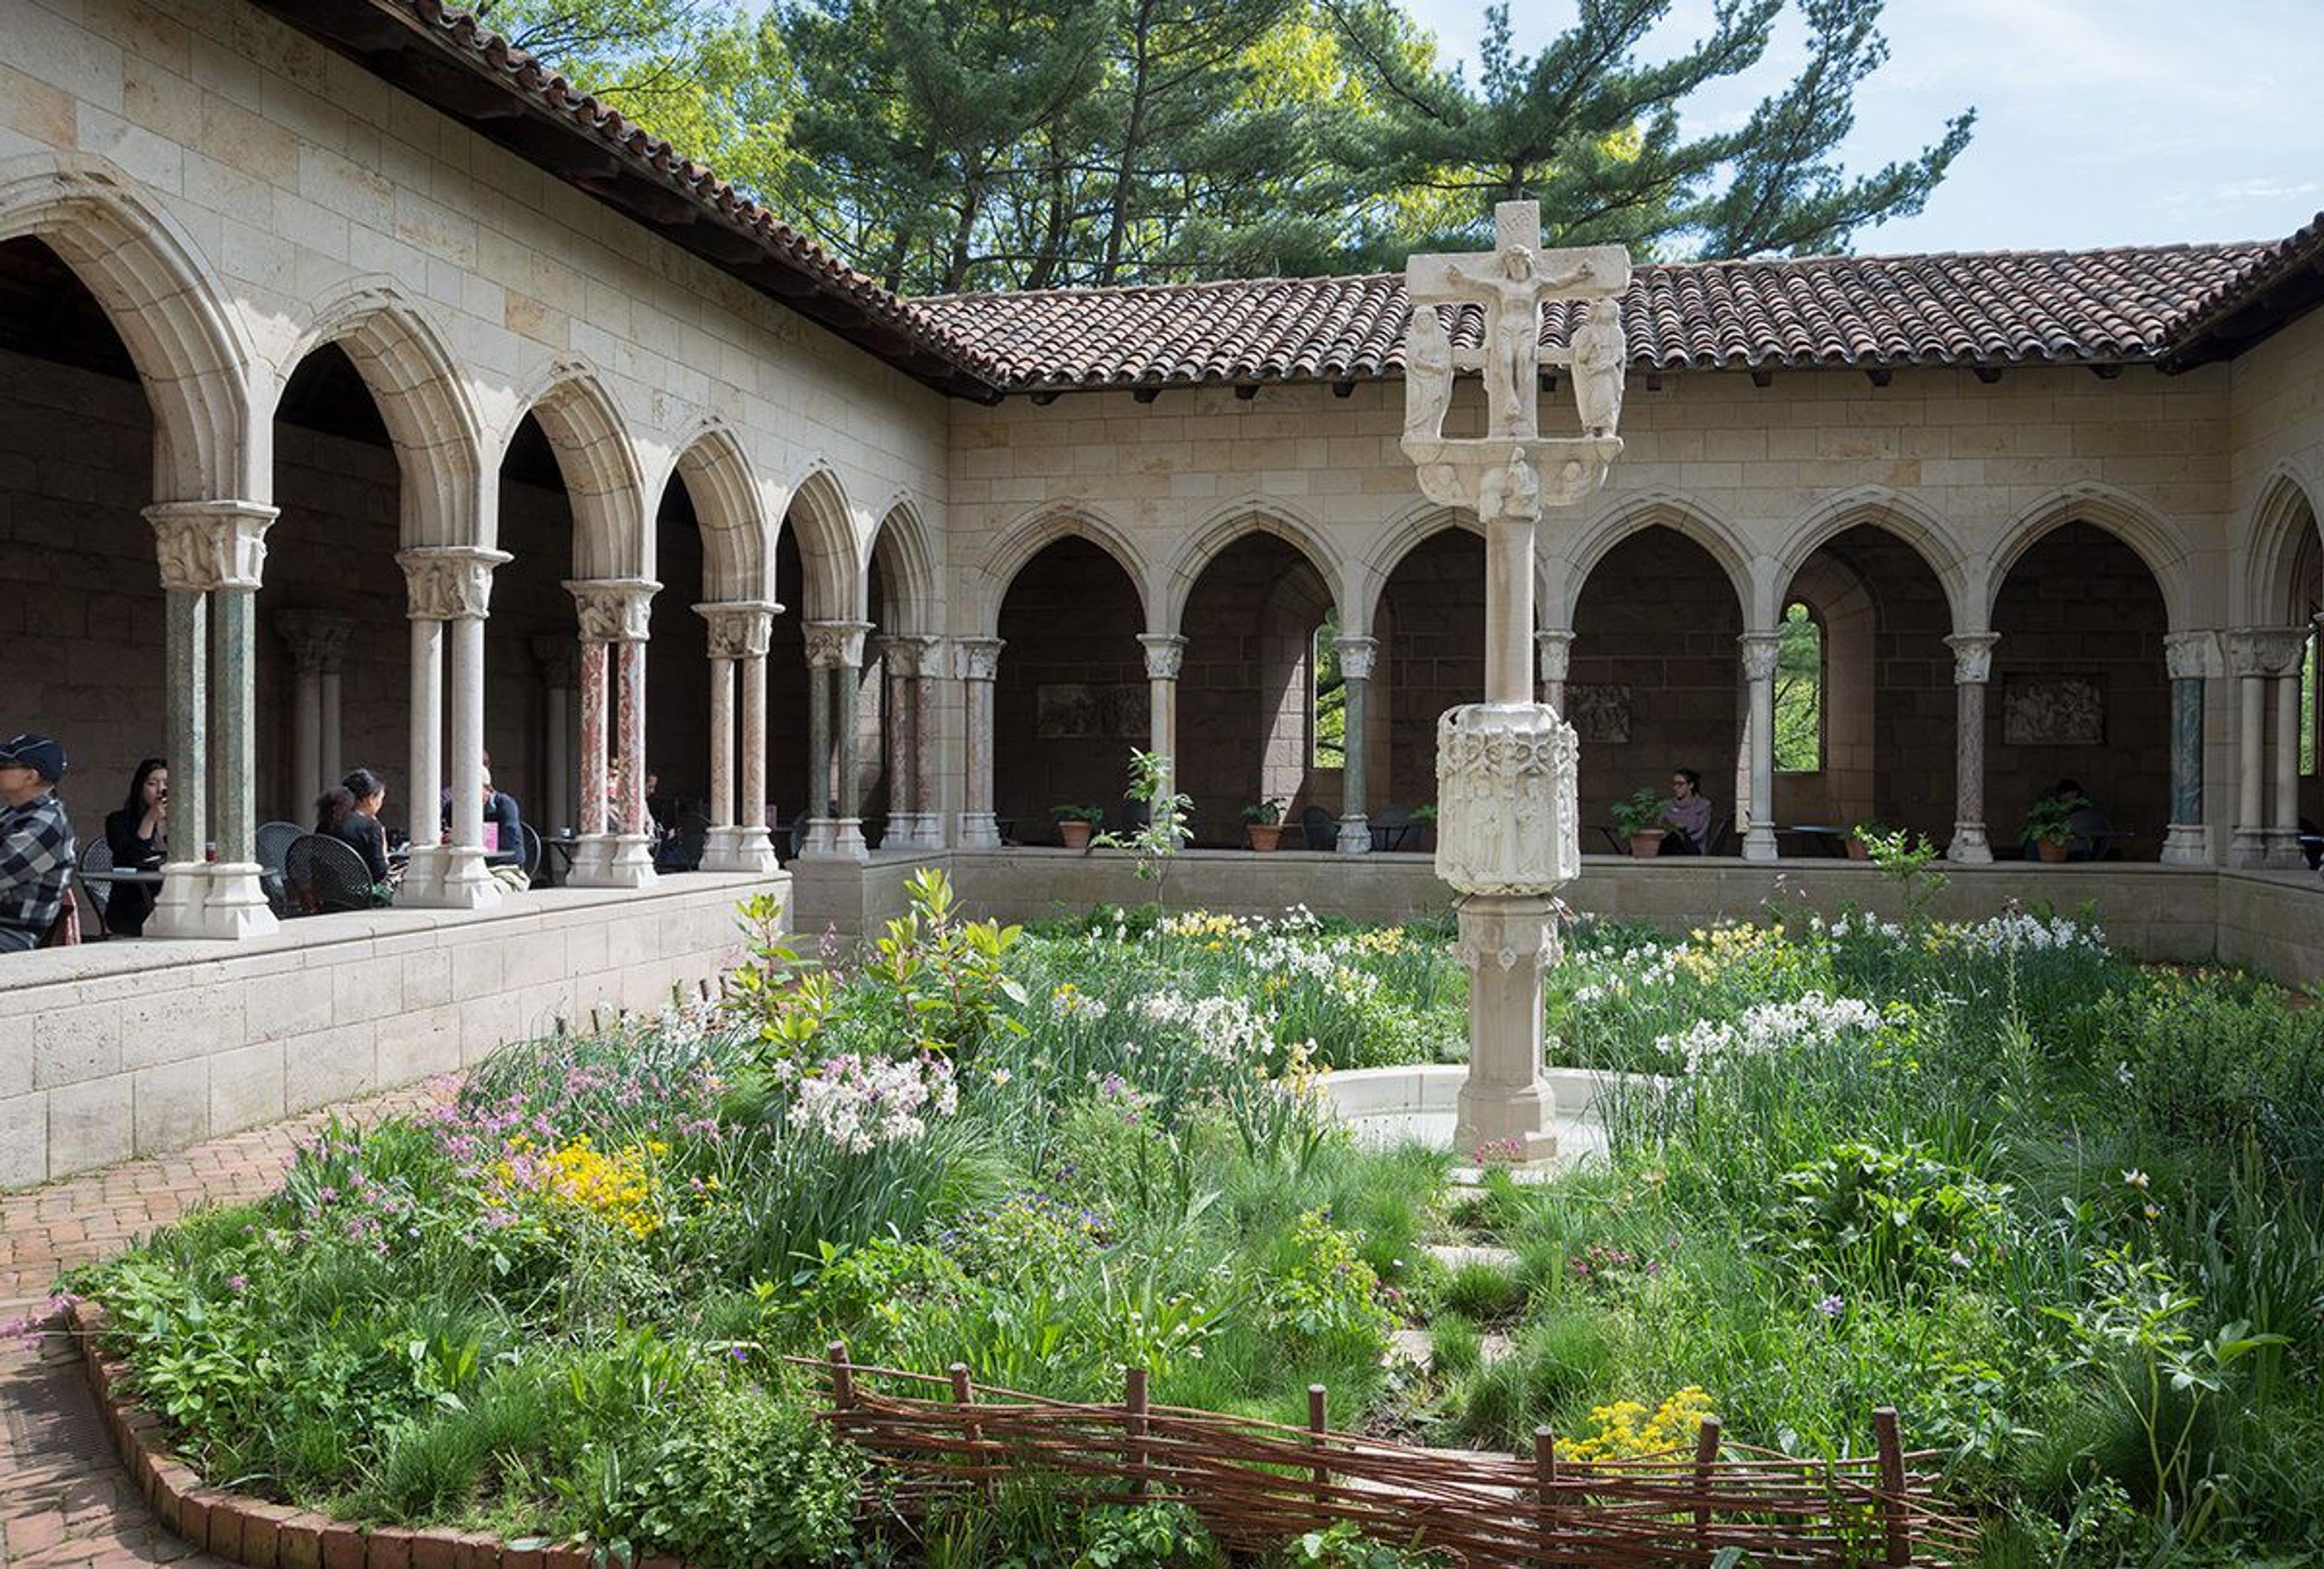 Patrons sit at tables and chairs in a stone arcade overlooking a garden.